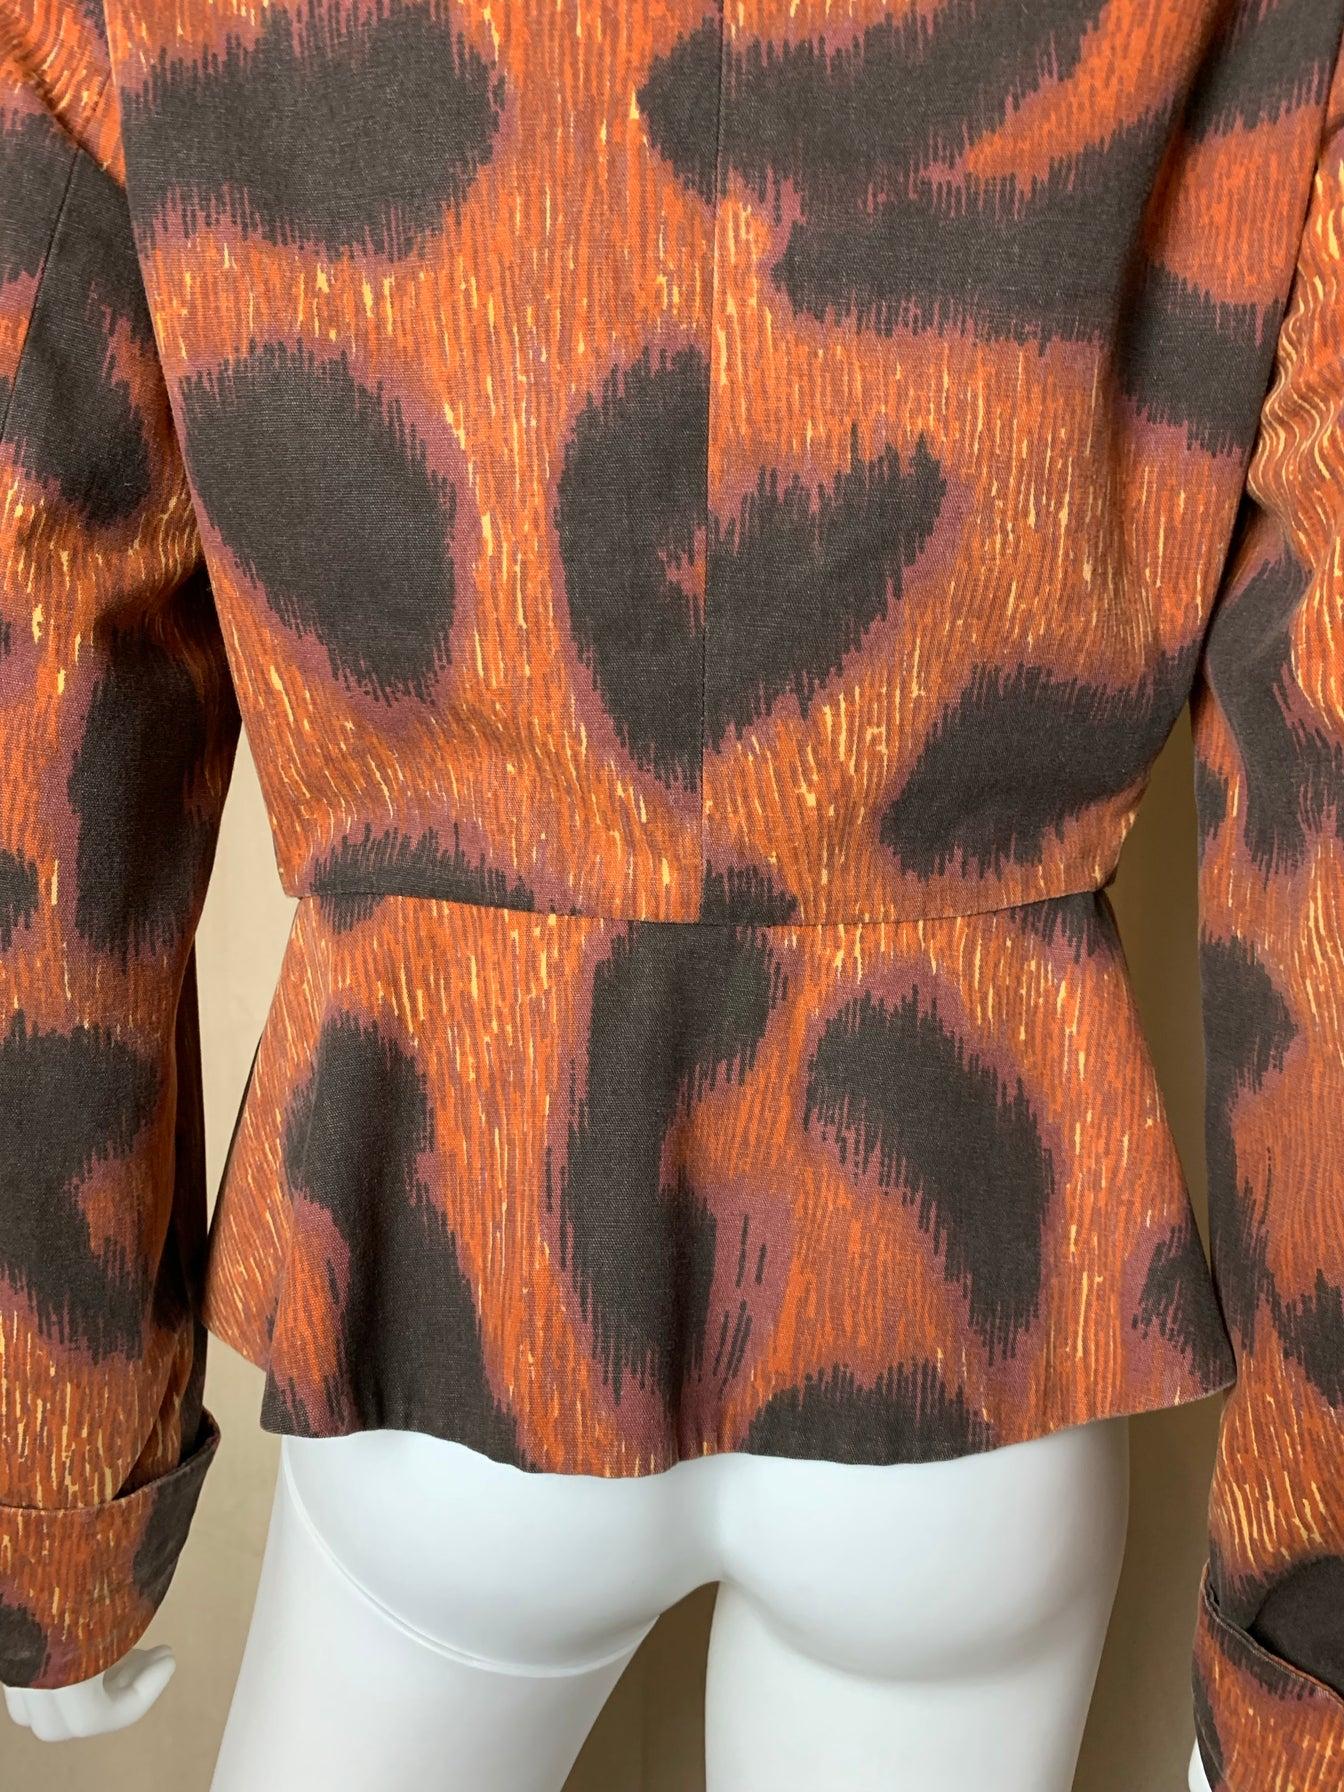 Vivienne Westwood SS 1994 Café Society Leopard Jacket In Excellent Condition For Sale In Avon, CT